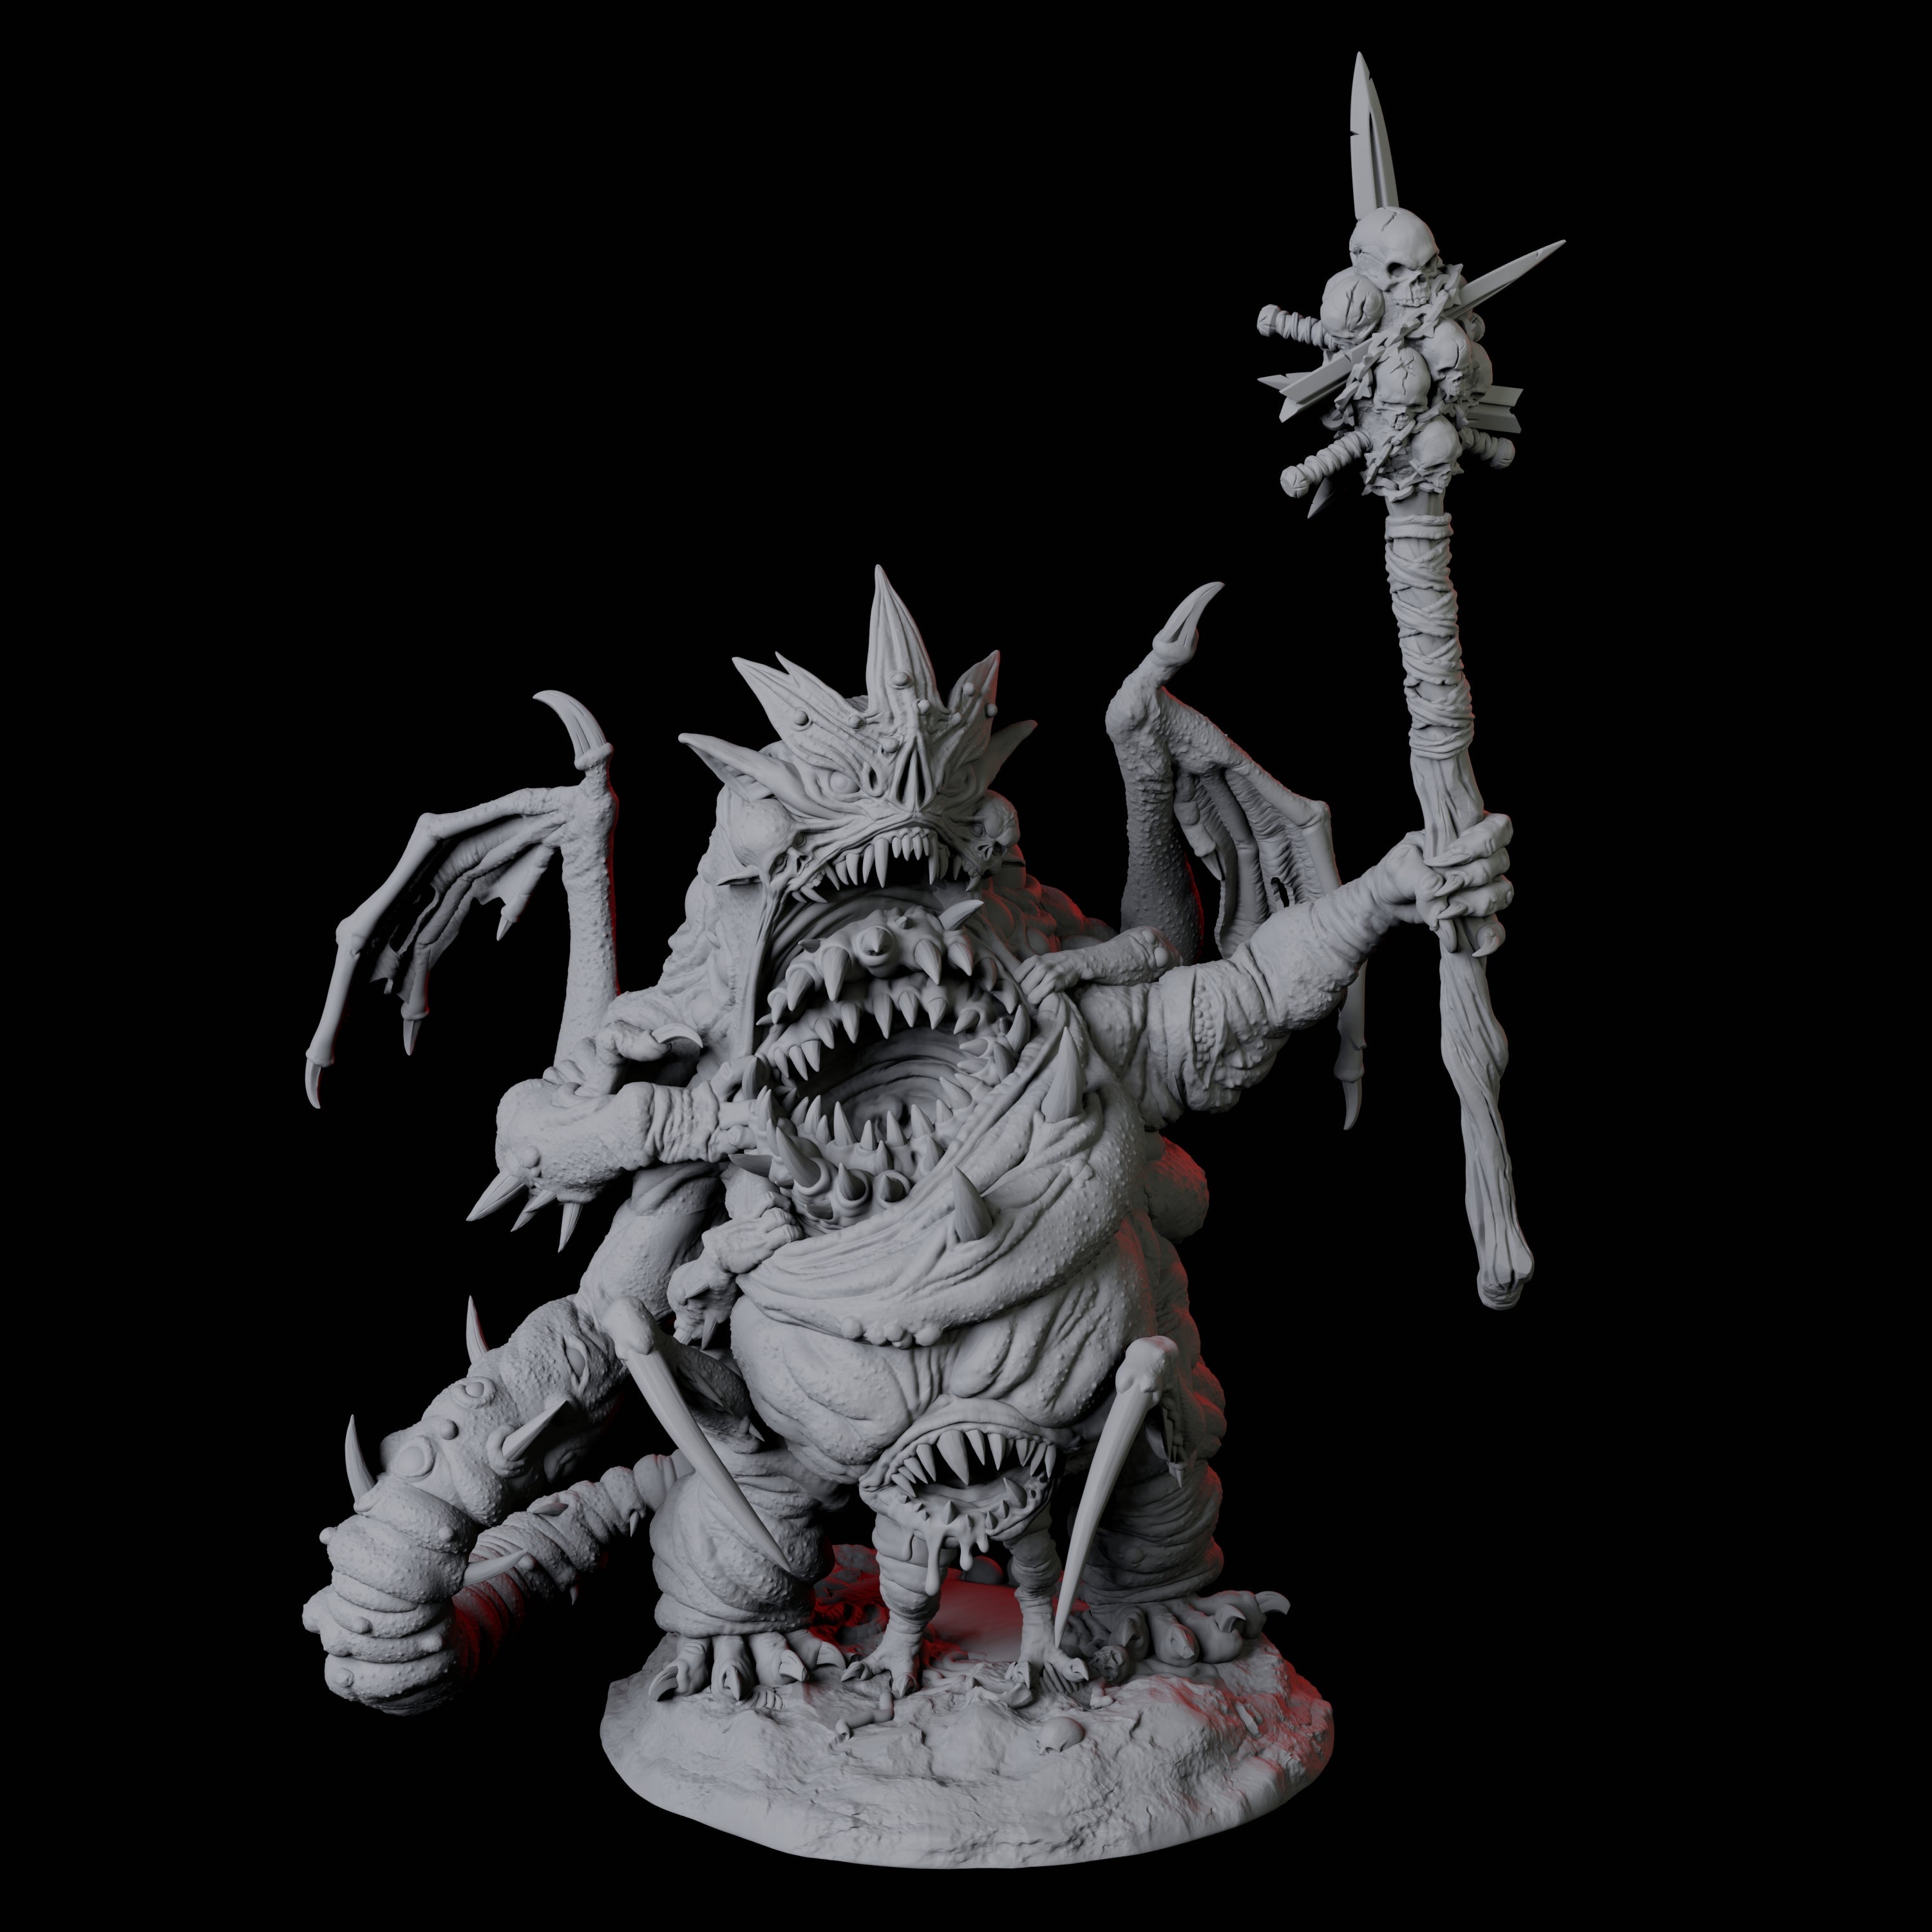 Fleshwarped Irnakurse D Miniature for Dungeons and Dragons, Pathfinder or other TTRPGs